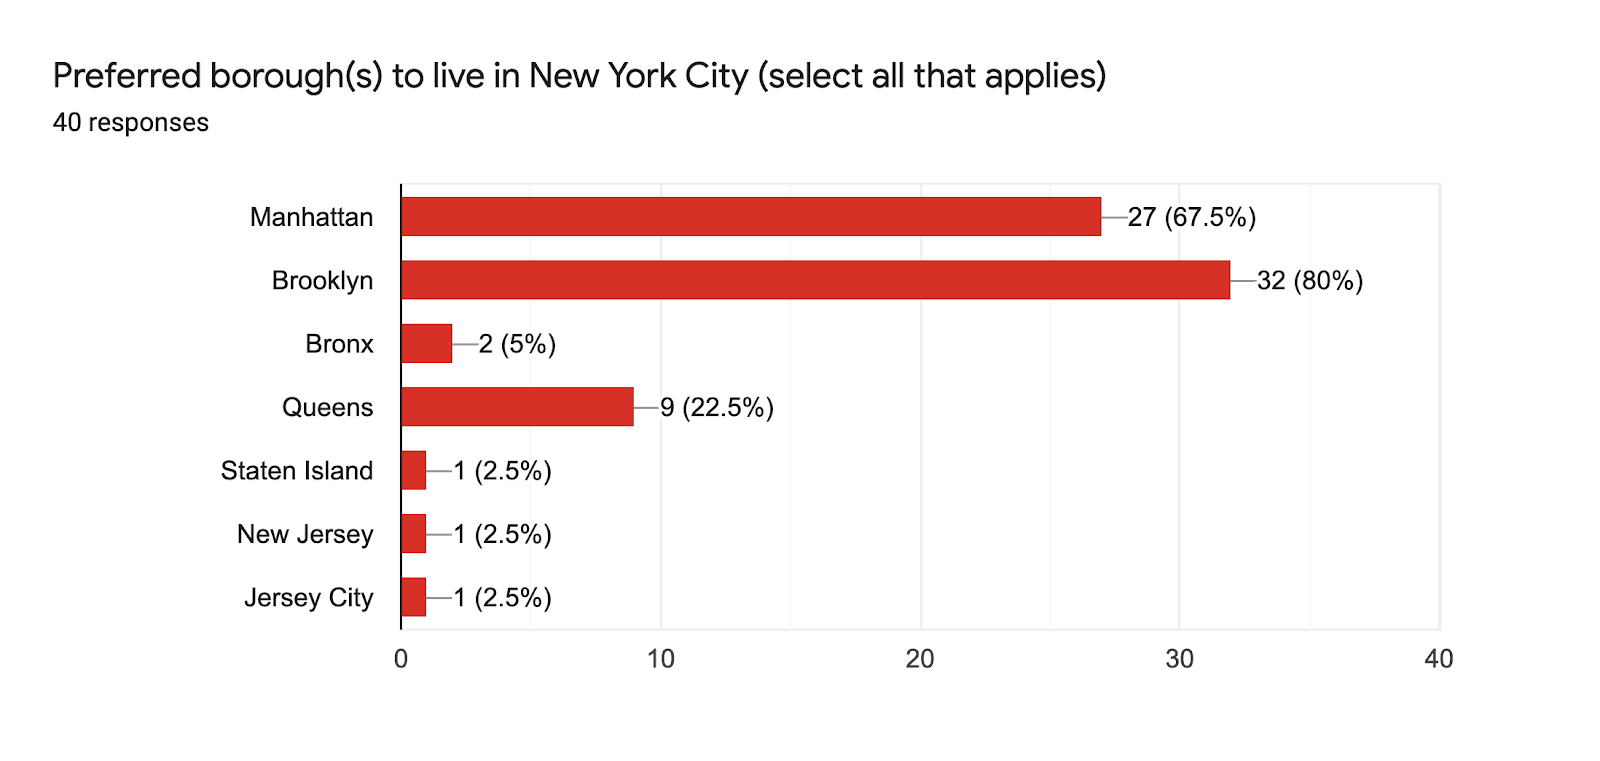 Forms response chart. Question title: Preferred borough(s) to live in New York City (select all that applies). Number of responses: 40 responses.